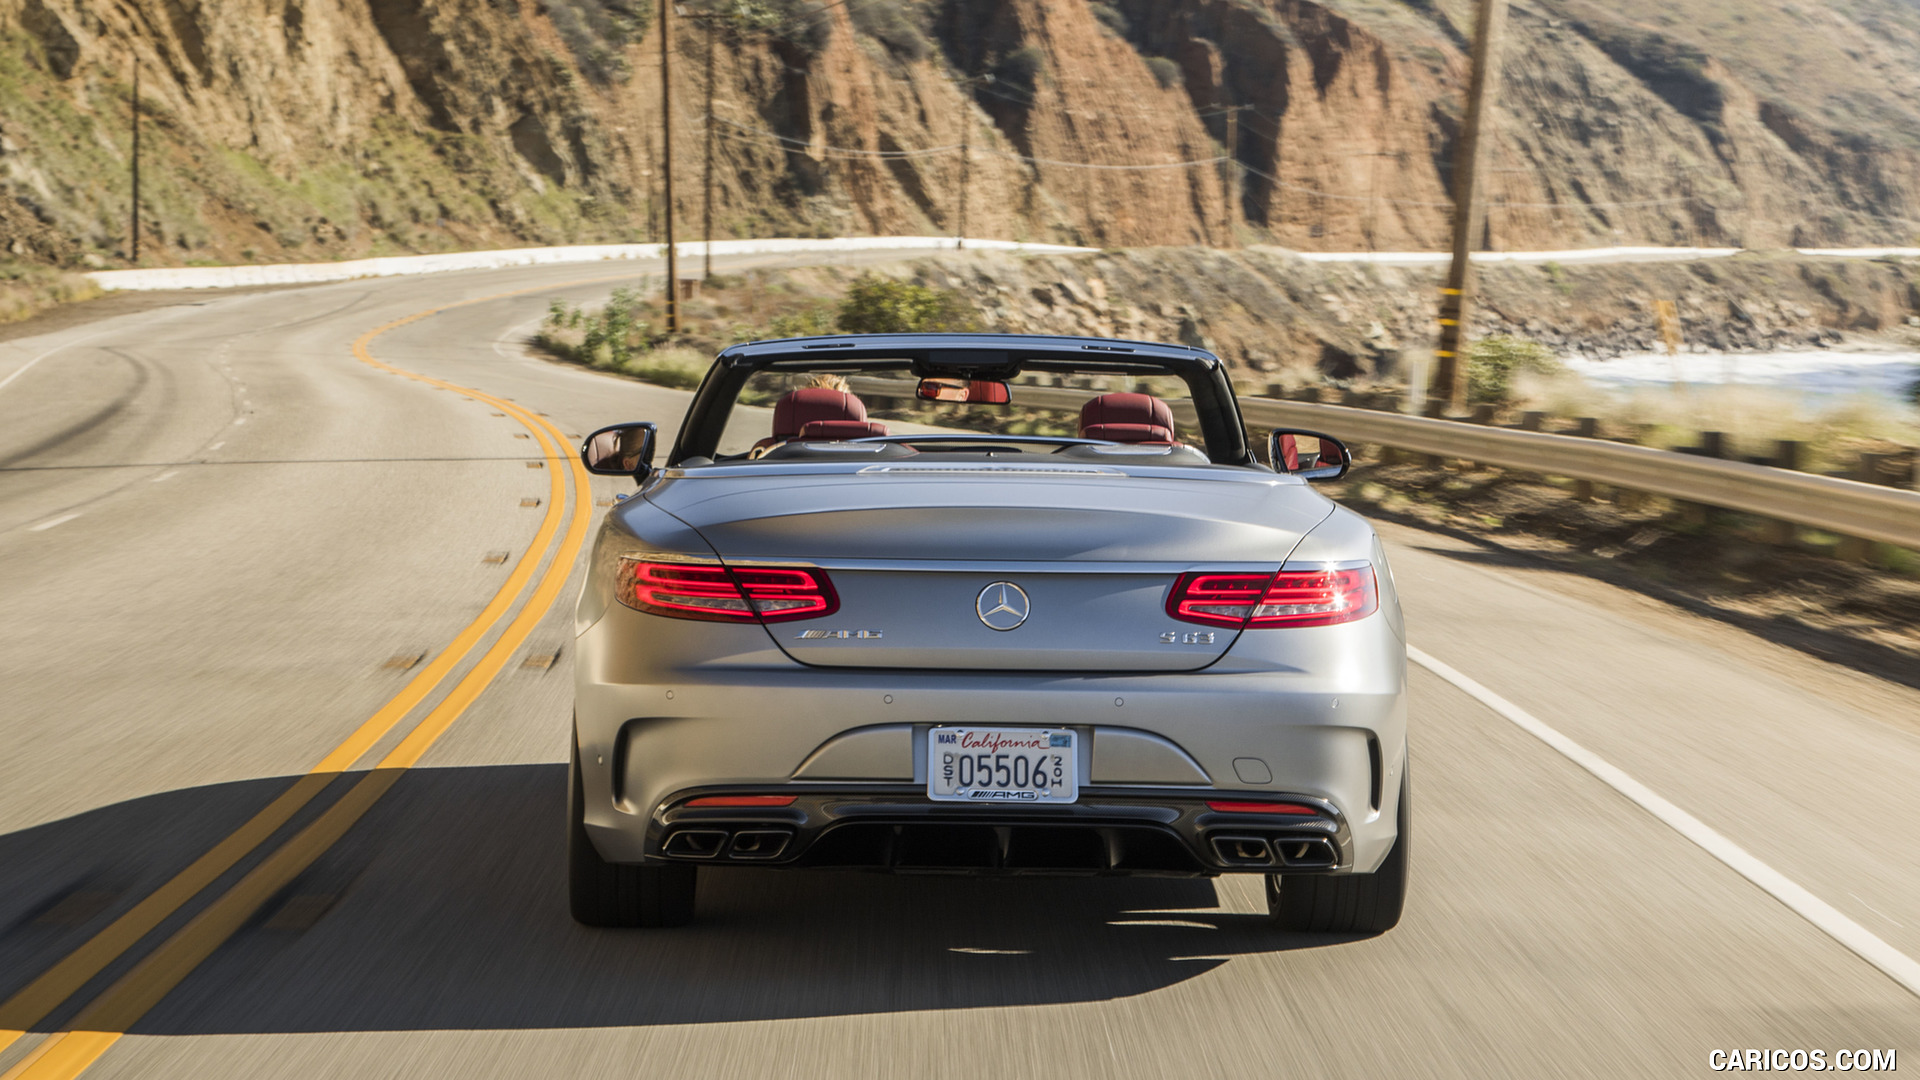 2017 Mercedes-AMG S63 Cabriolet (US-Spec) - Rear, #28 of 65